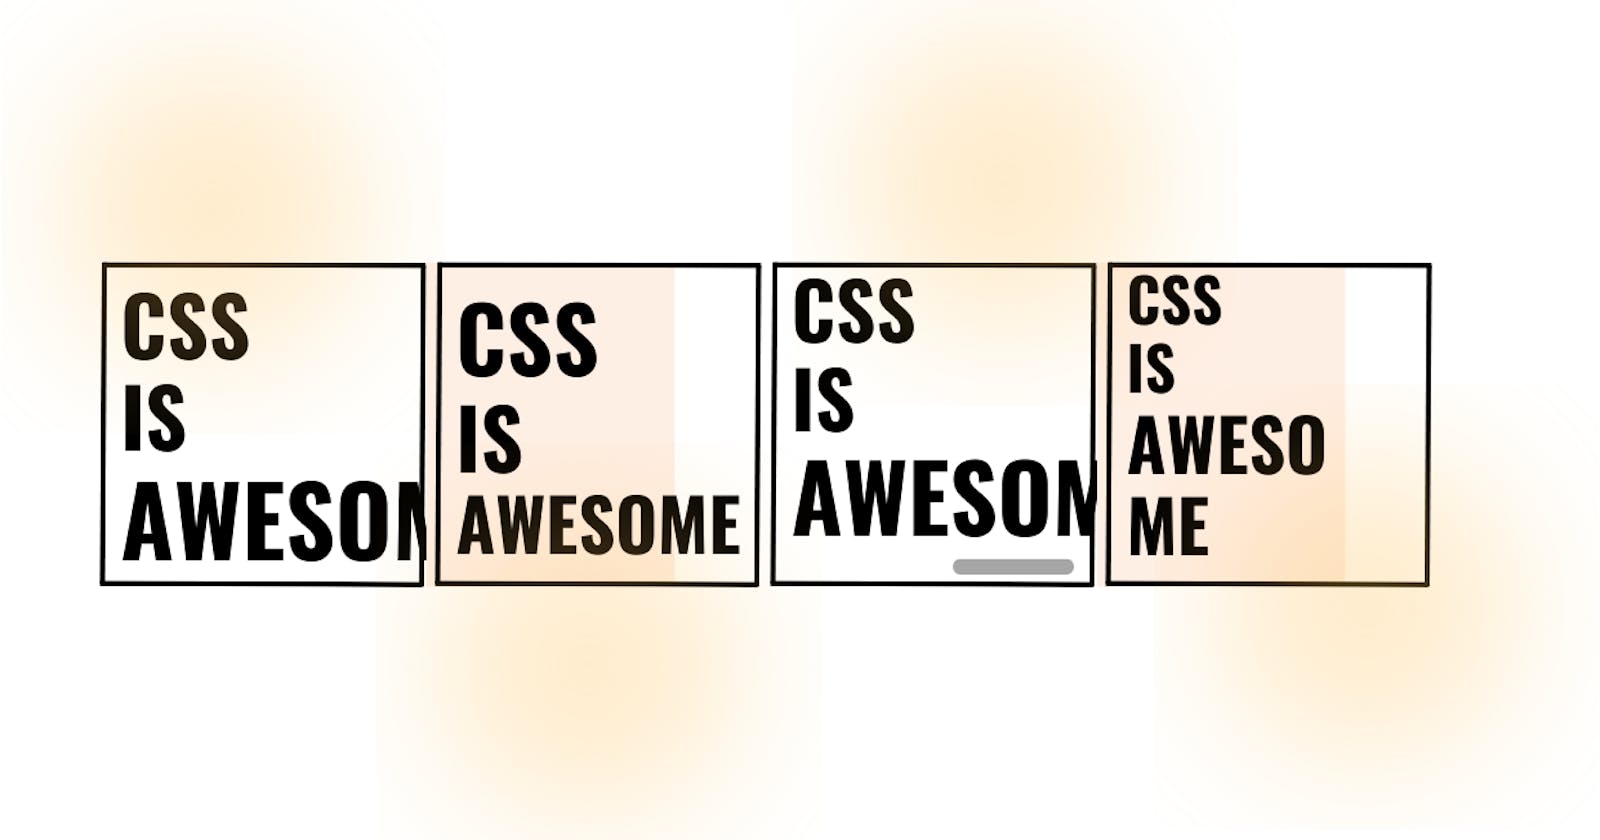 4 ways to deal with overflowing text in CSS!